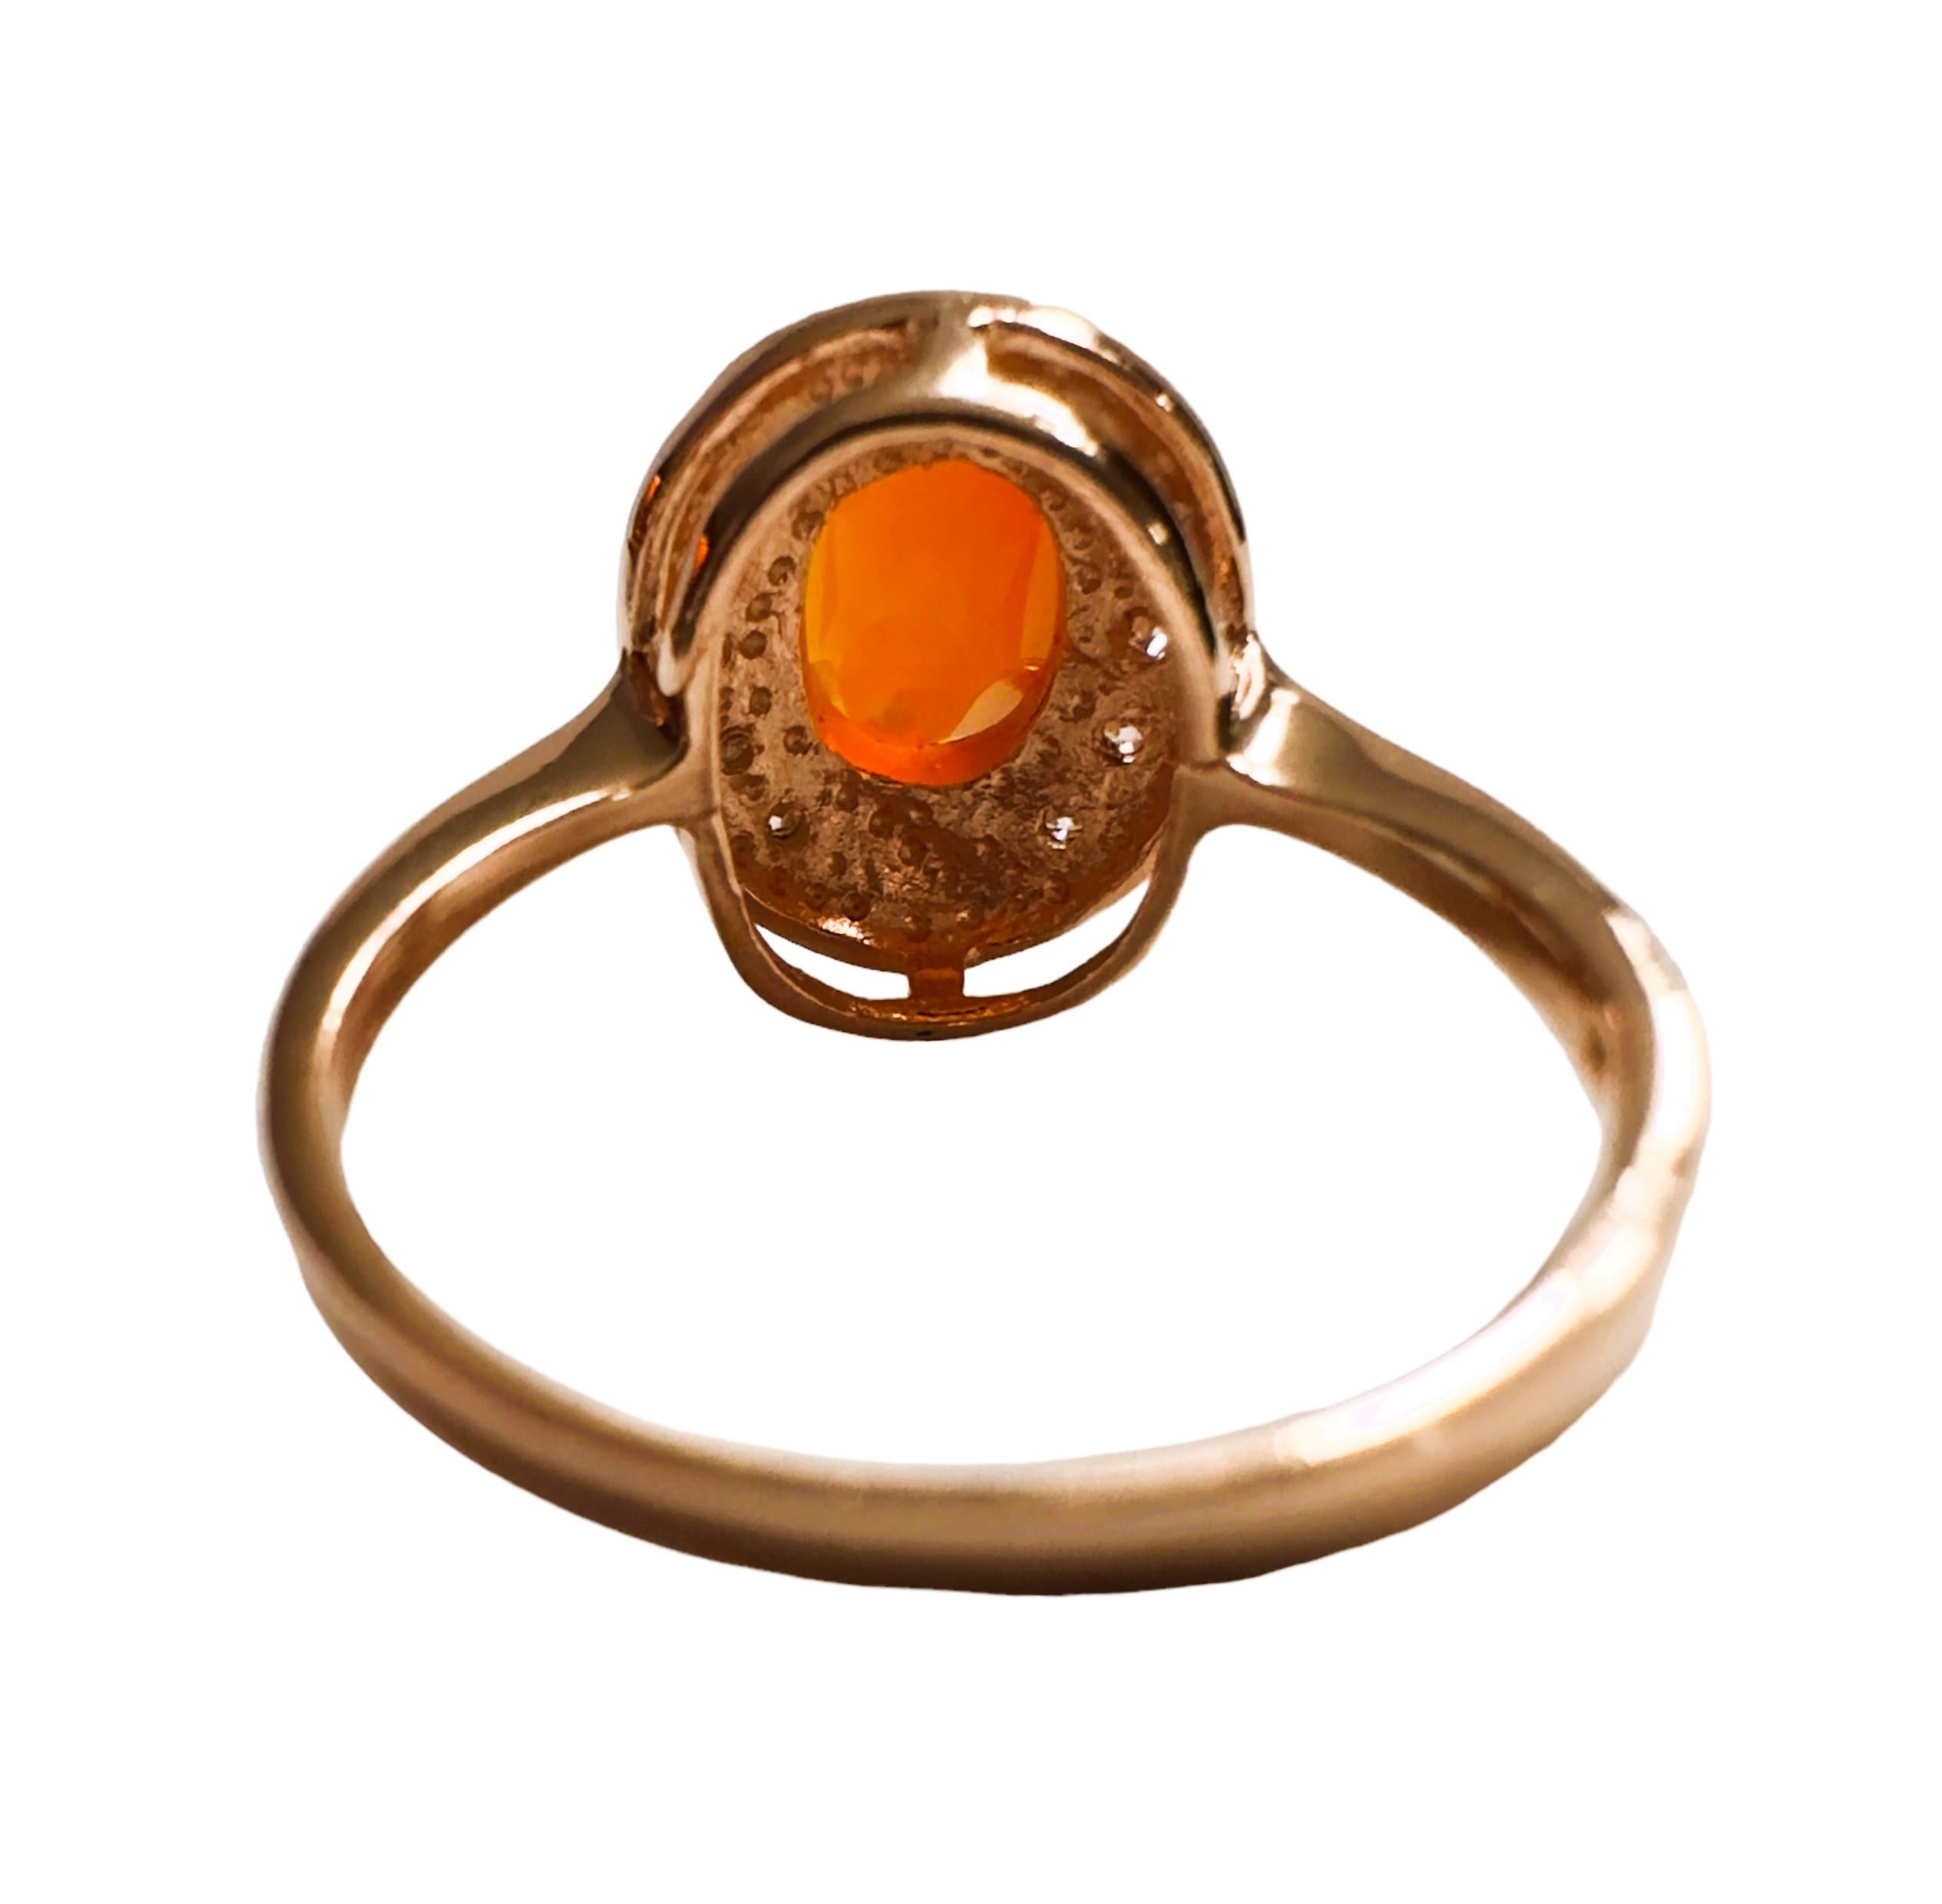 New Mexican IF 1.2 Ct Orange Fire Opal & White Sapphire R Gold Sterling Ring In New Condition For Sale In Eagan, MN